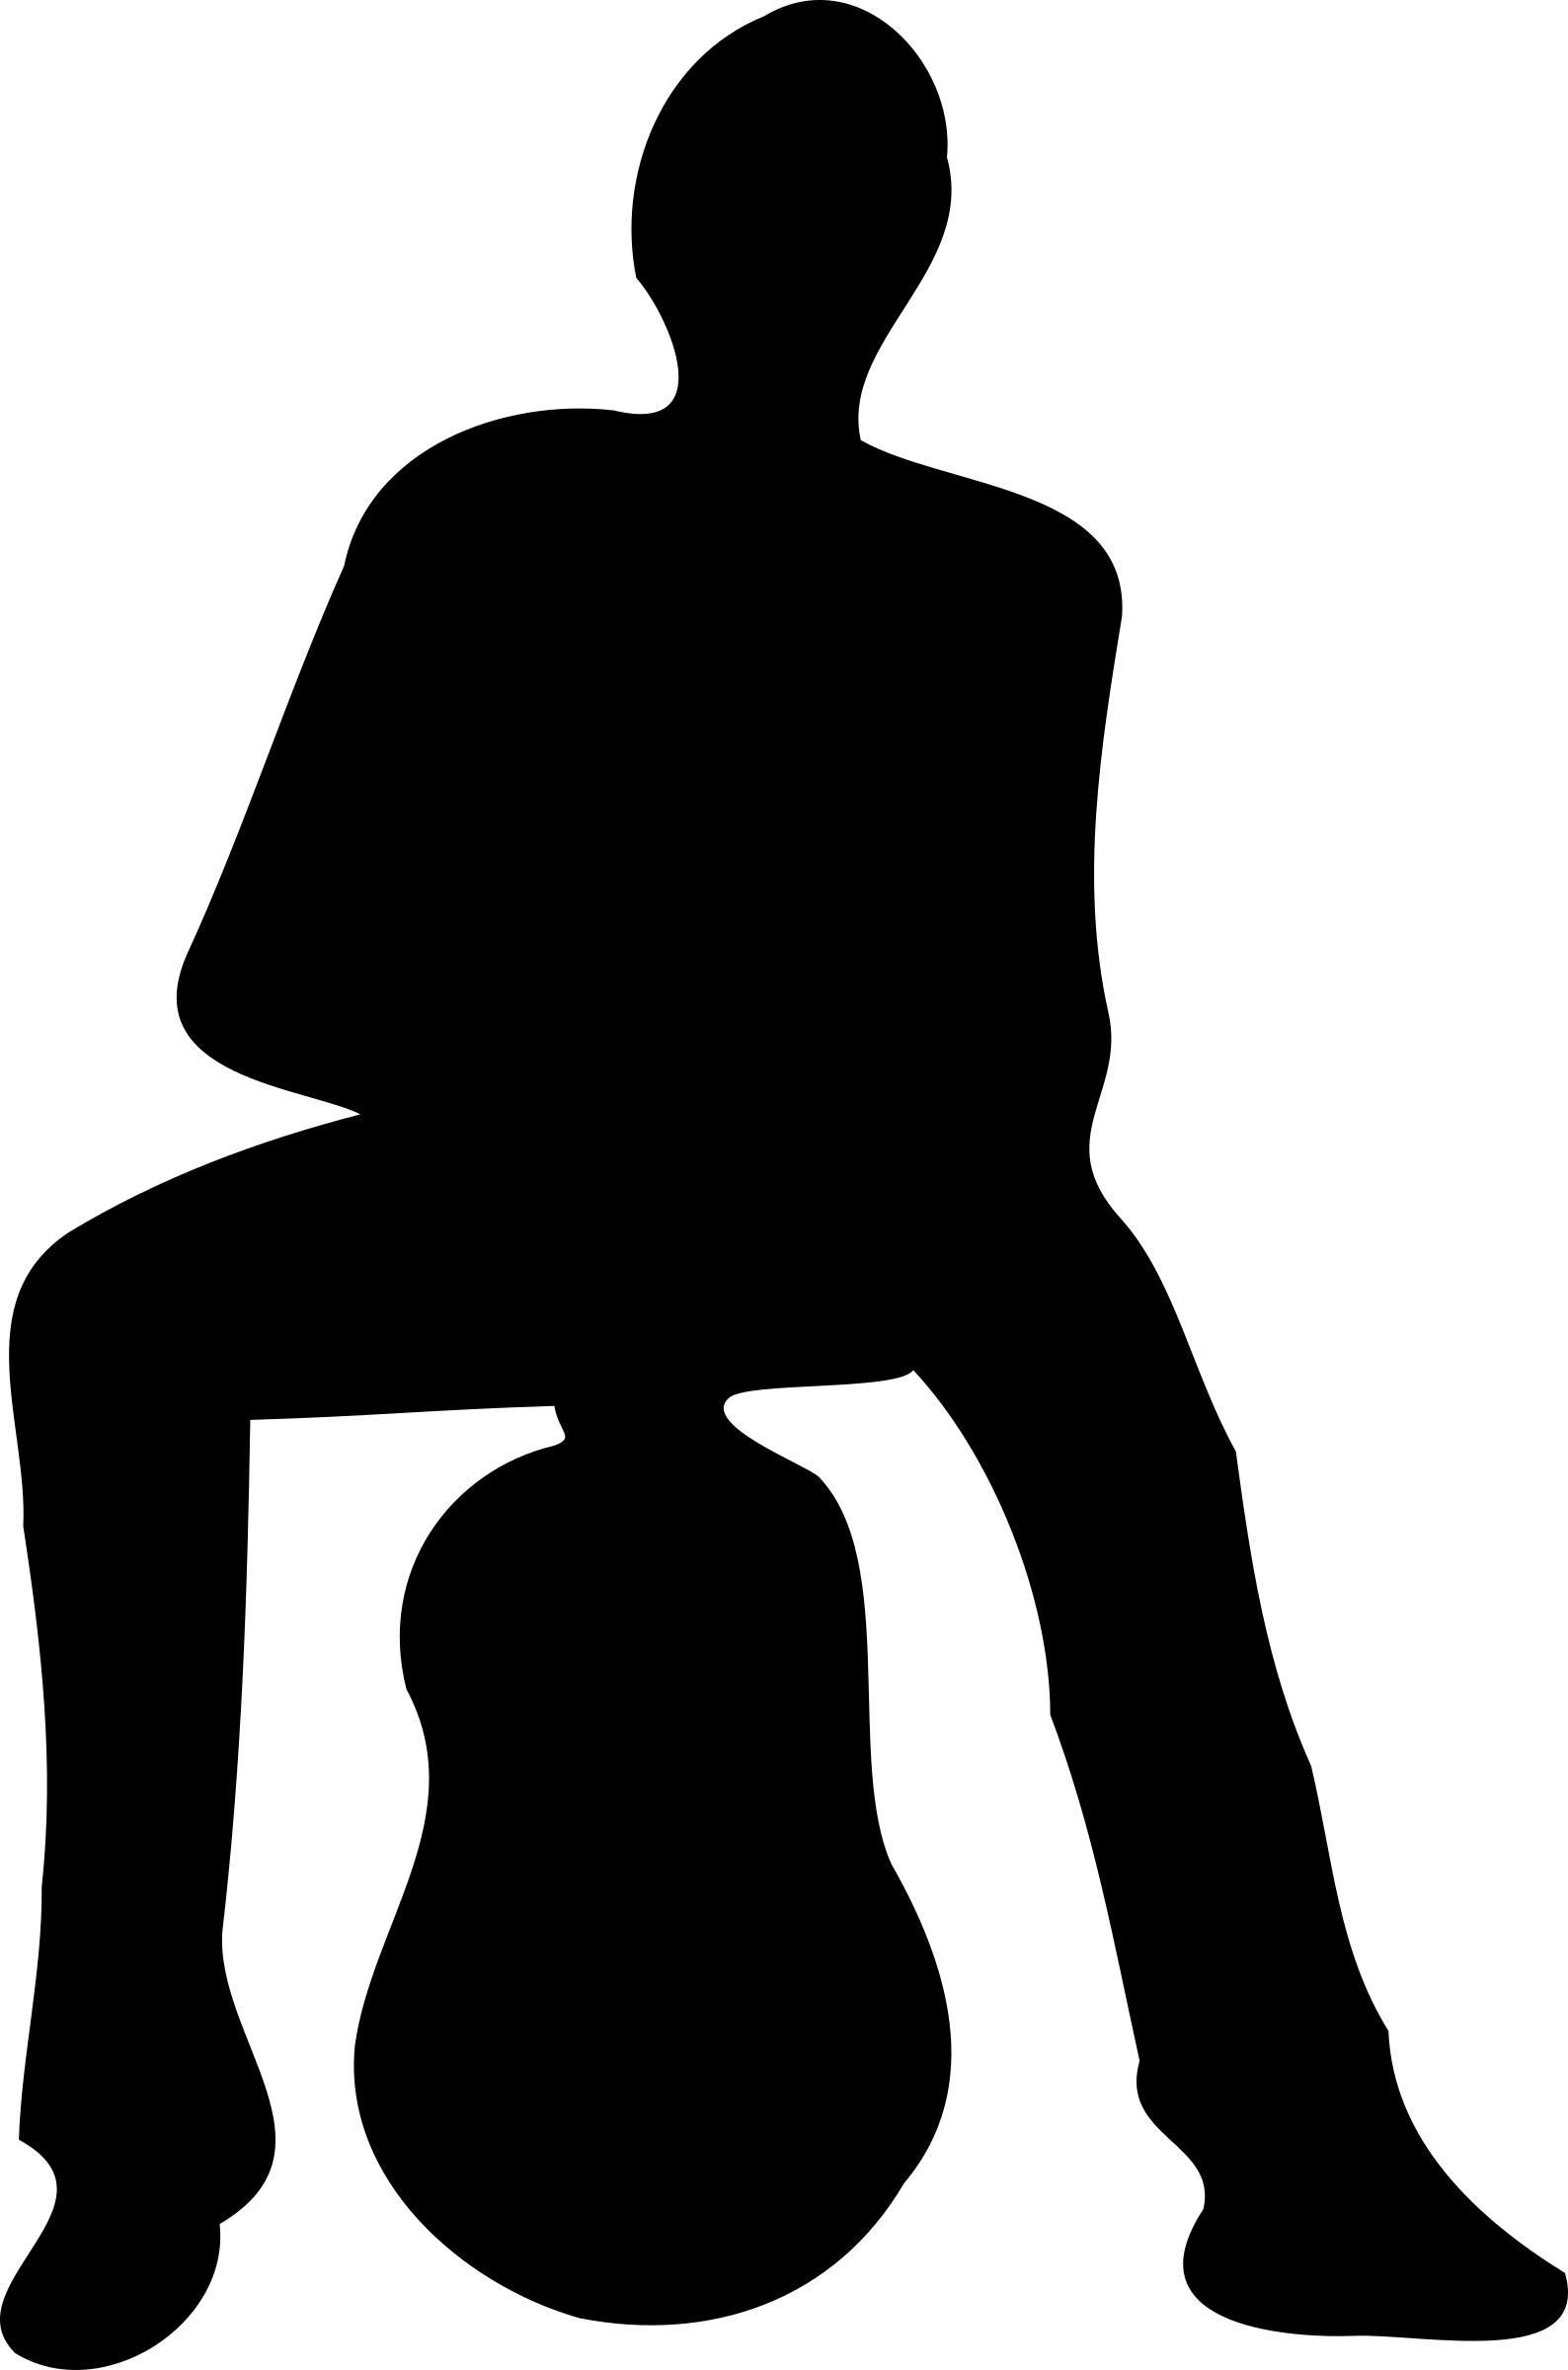 Silhouette of man and guitar Icons PNG - Free PNG and Icons Downloads